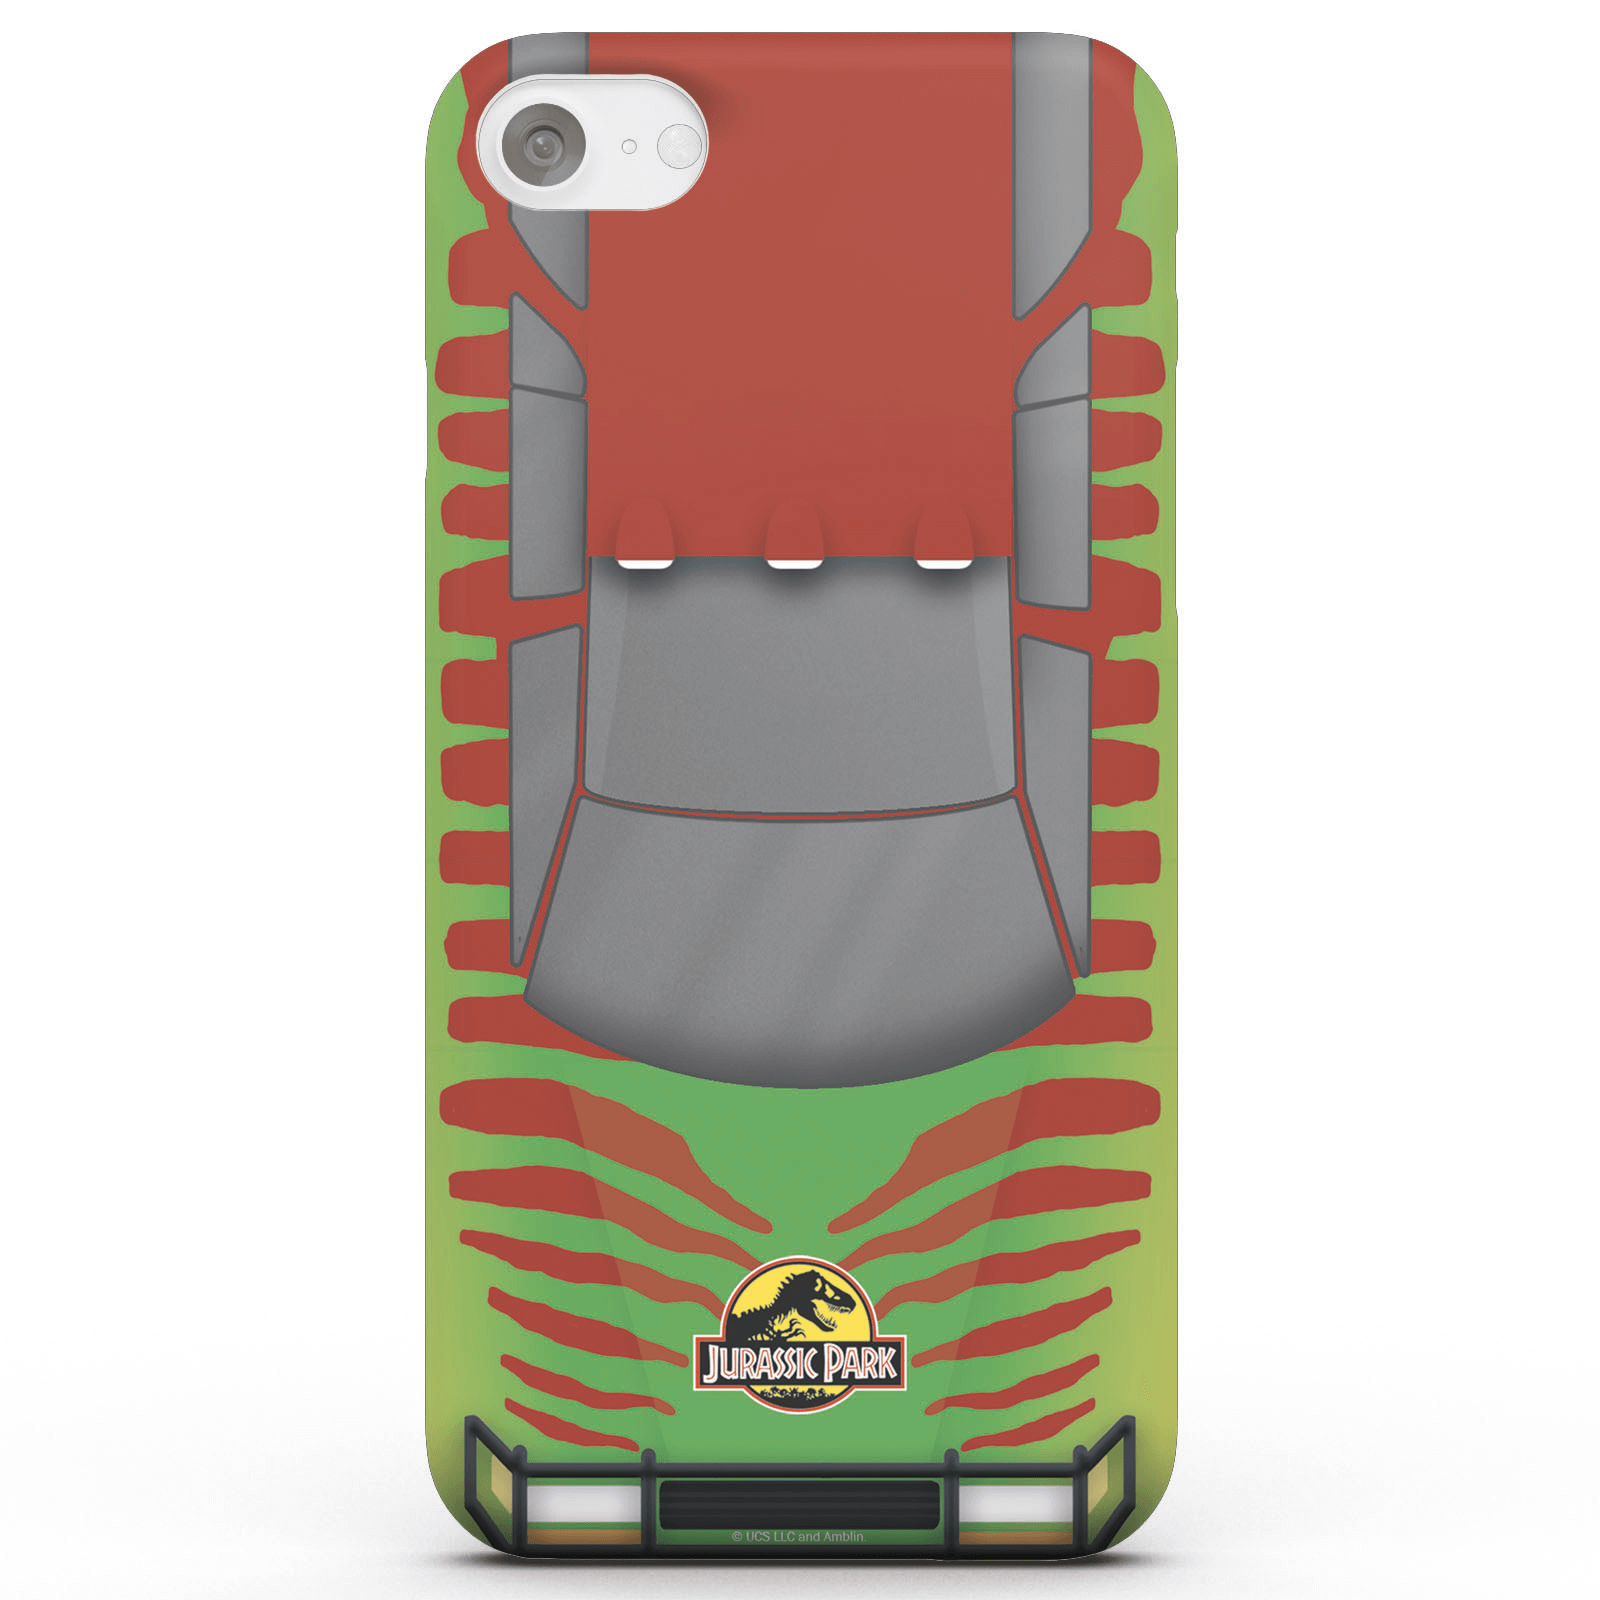 Photos - Case Park Jurassic  Tour Car Phone  for iPhone and Android - iPhone 5/5s - T 